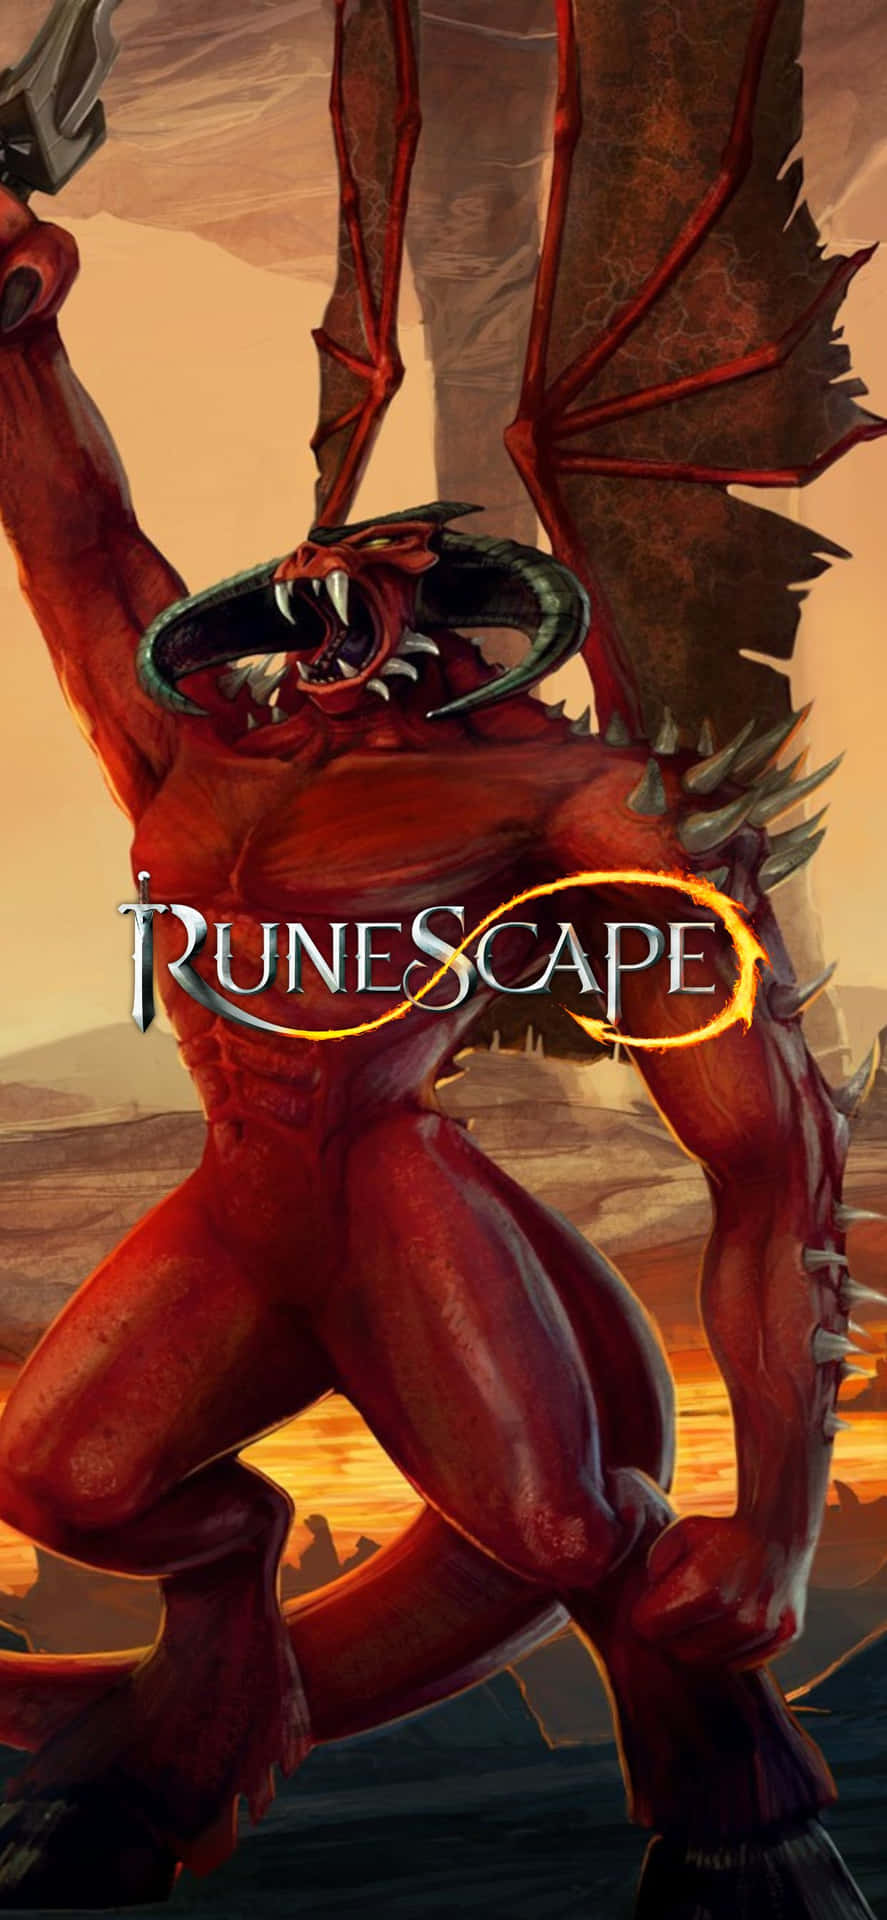 Explore the world of Runescape on your iPhone Xs Max